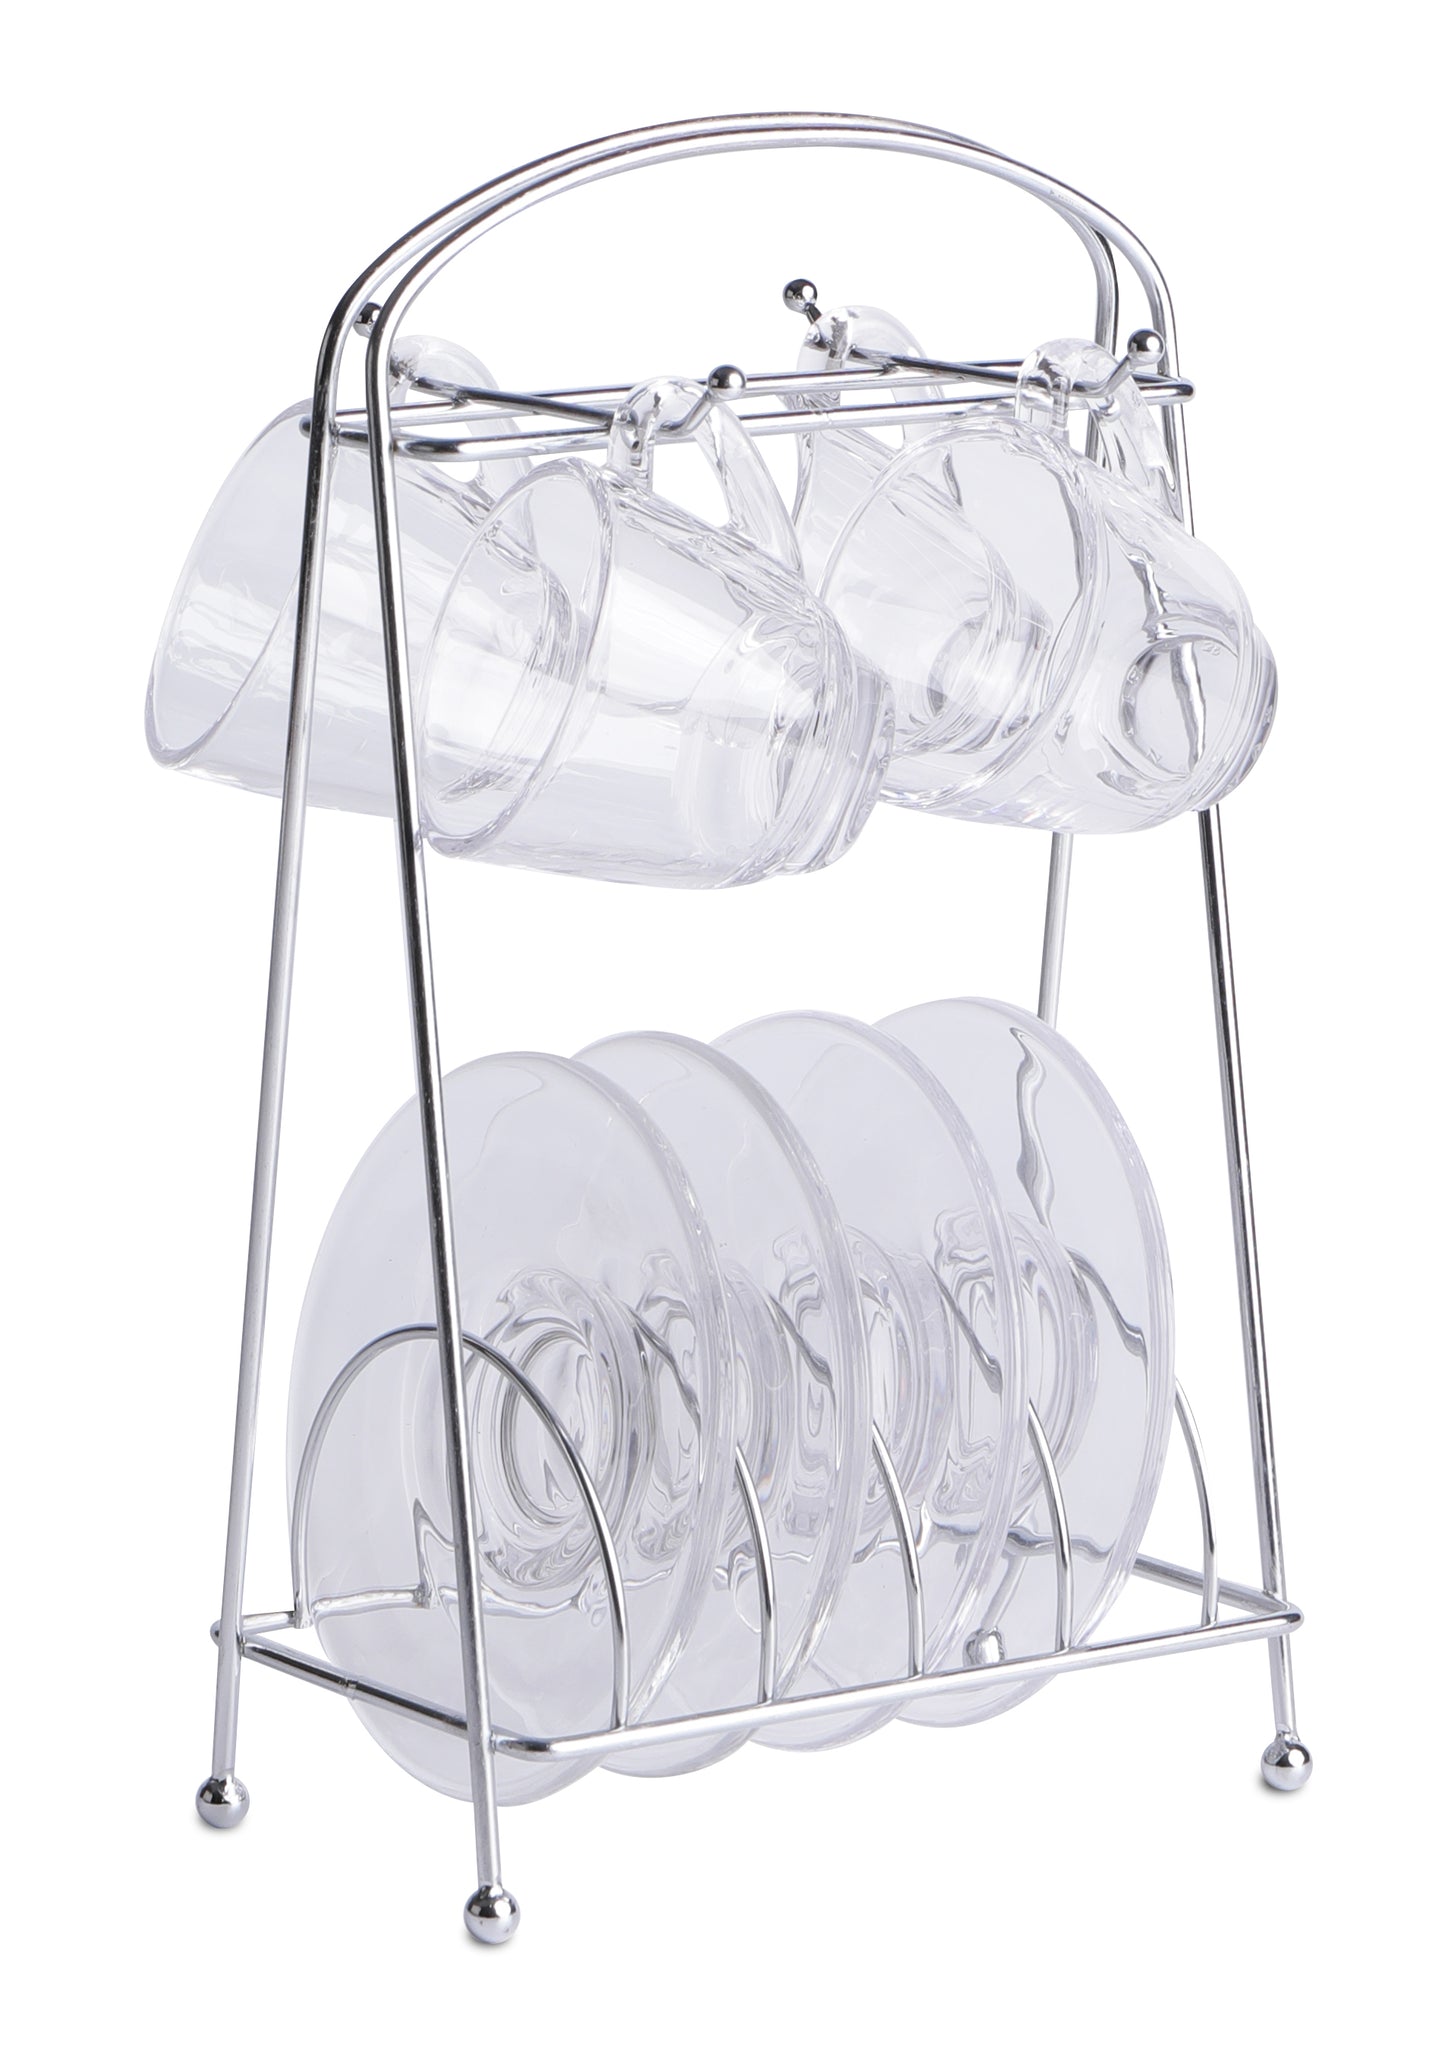 
                  
                    Bene Casa 4-Cup Glass Espresso Set with Coasters and Stainless Steel Rack
                  
                